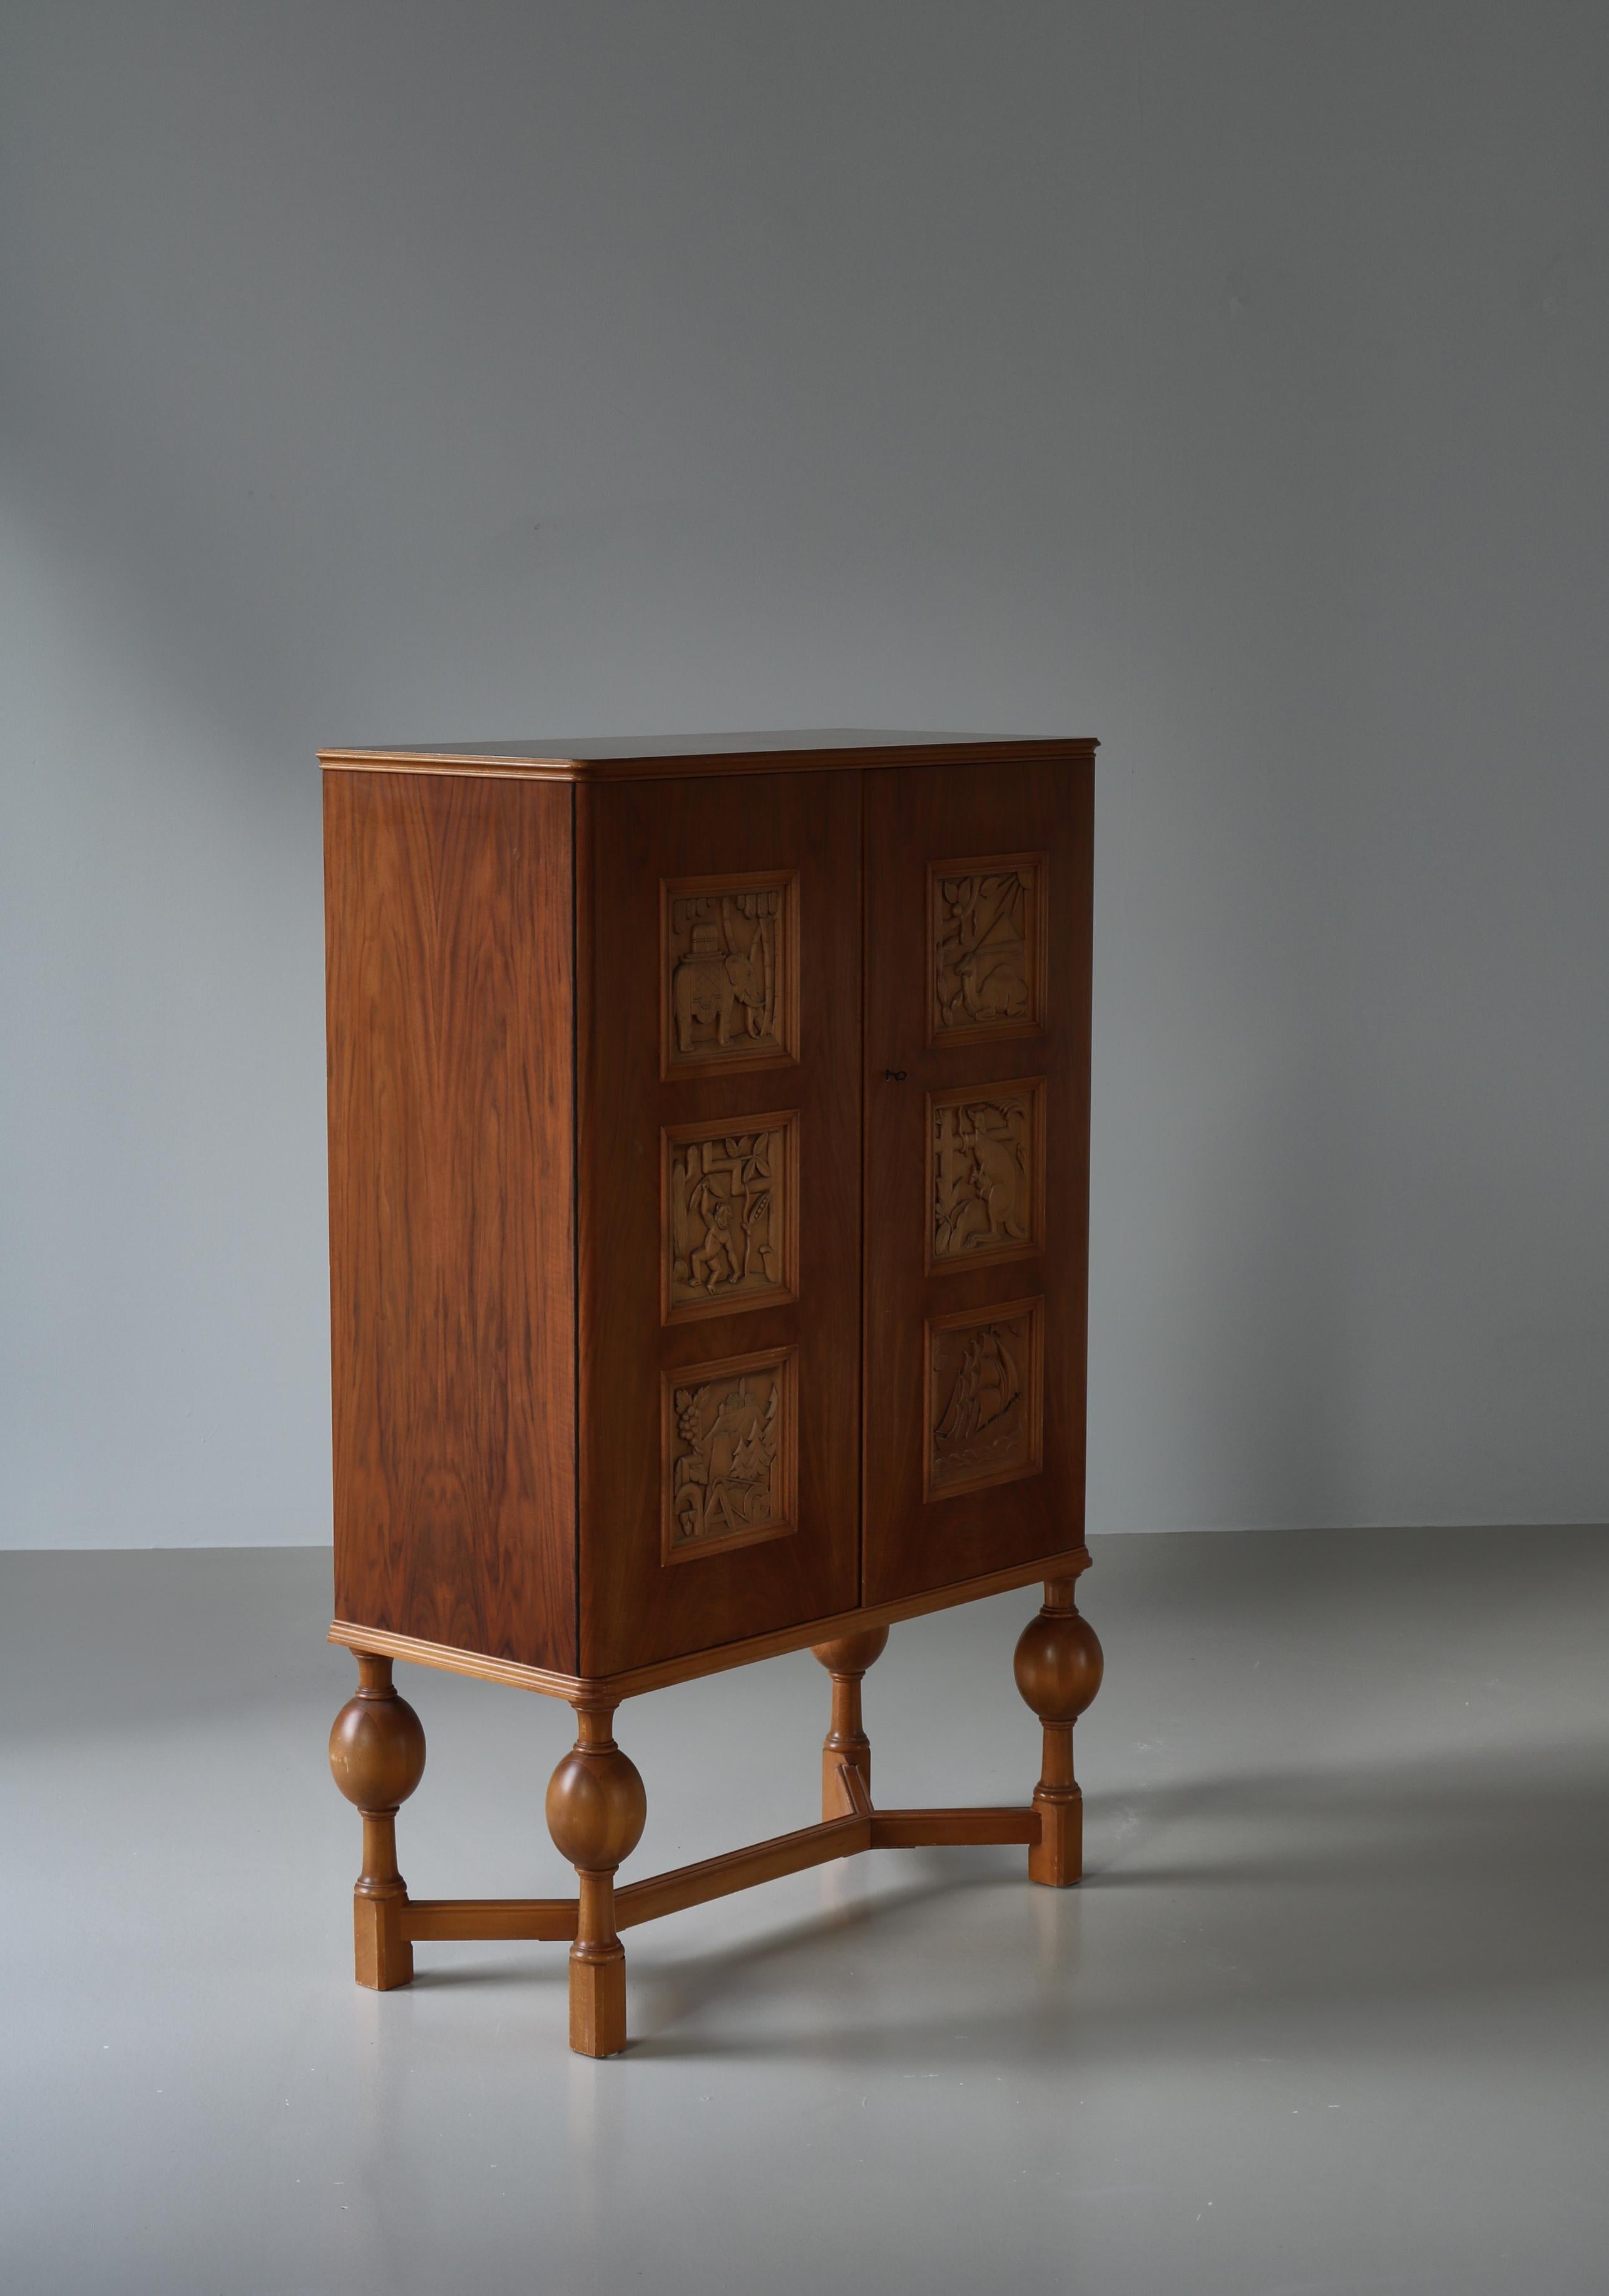 Mid-20th Century Swedish Grace Cabinet with Carved Decor by Eugen Höglund, Vetlanda, Sweden, 1930 For Sale